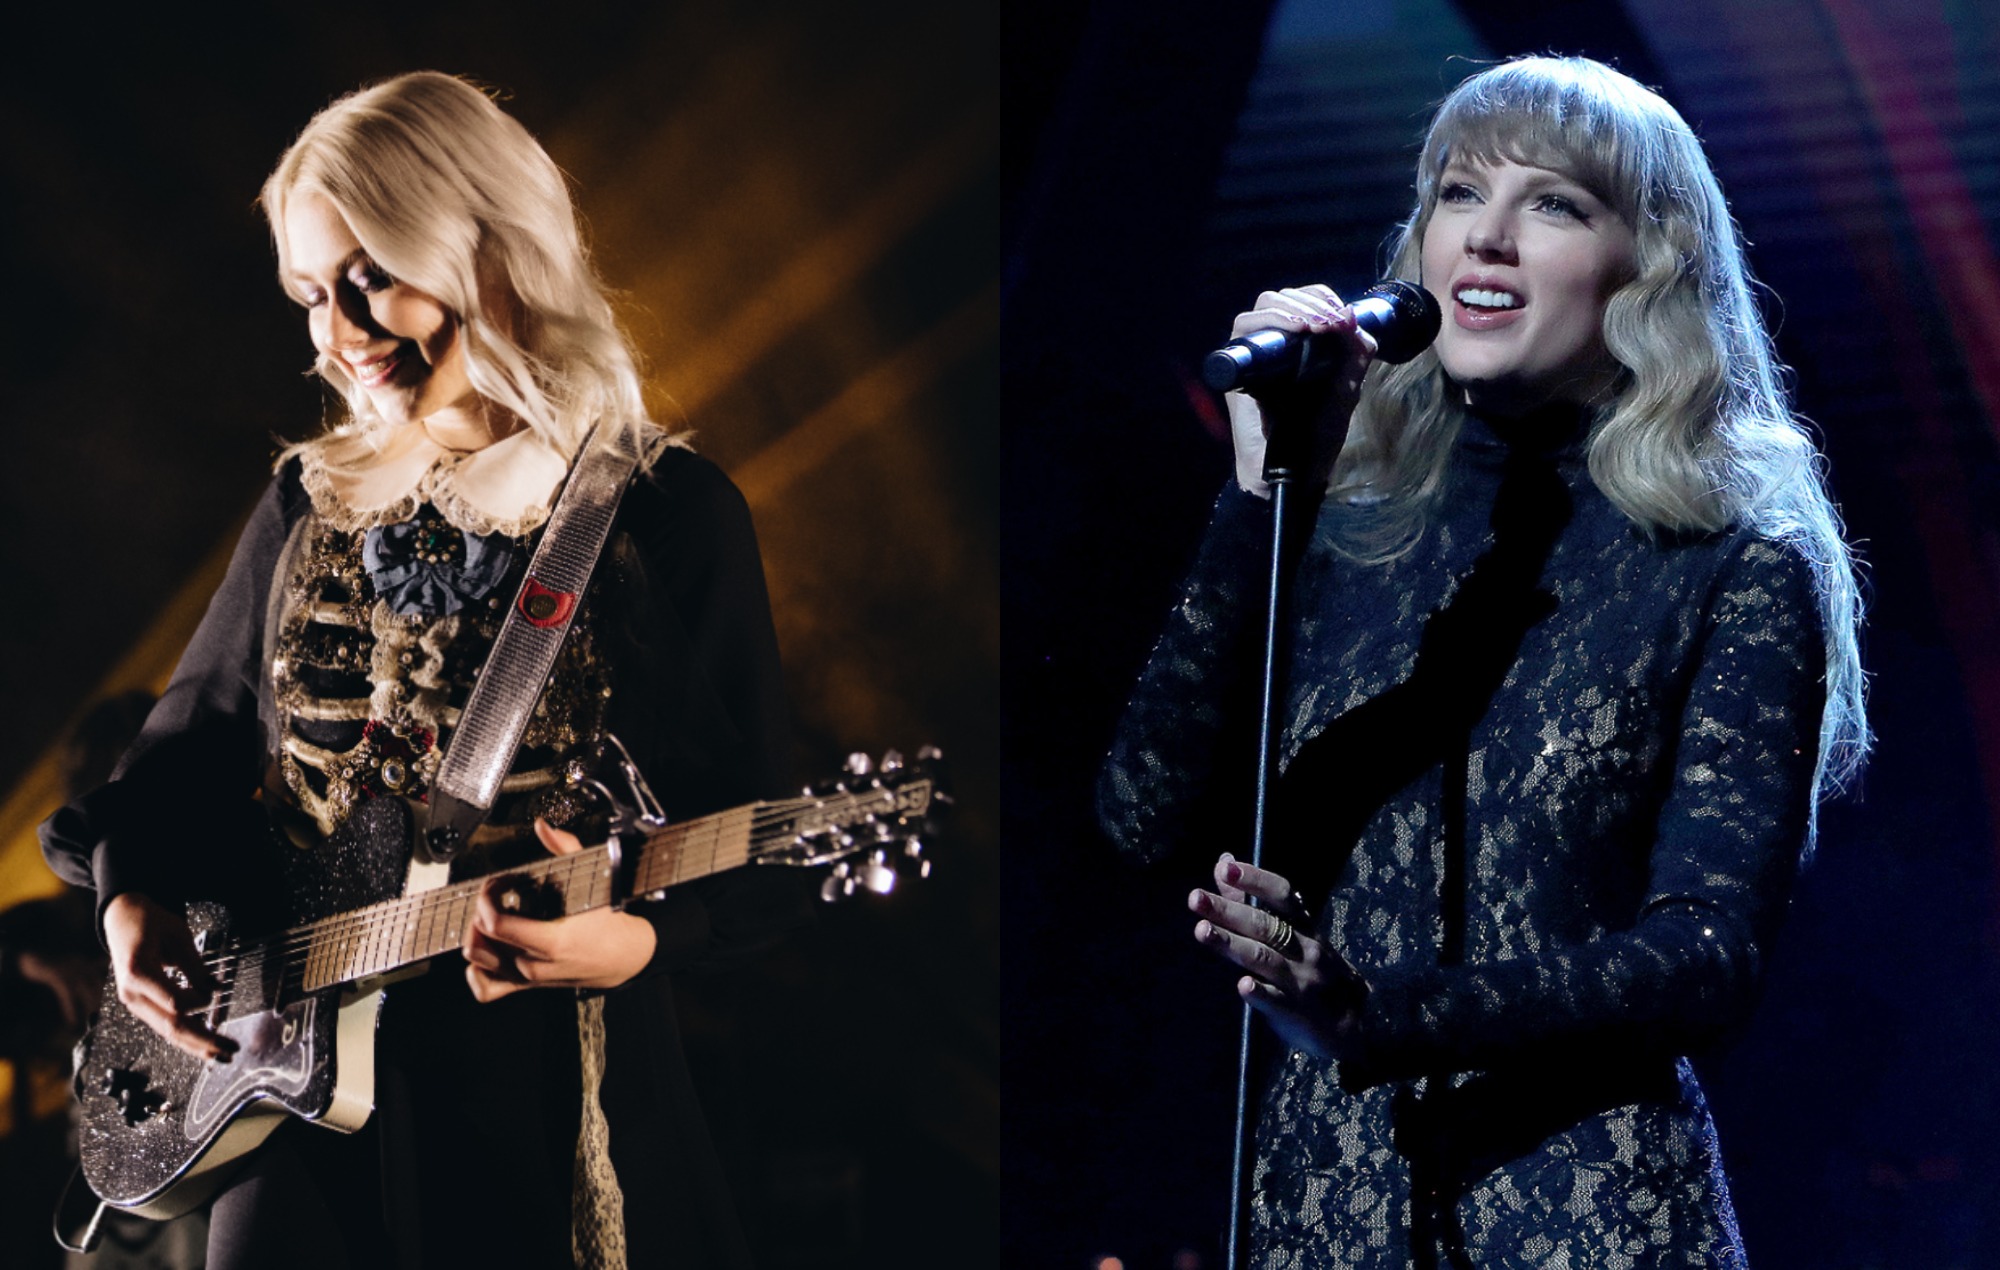 taylor-swift-phoebe-bridgers-red-taylor's-version-nothing-new-collaboration